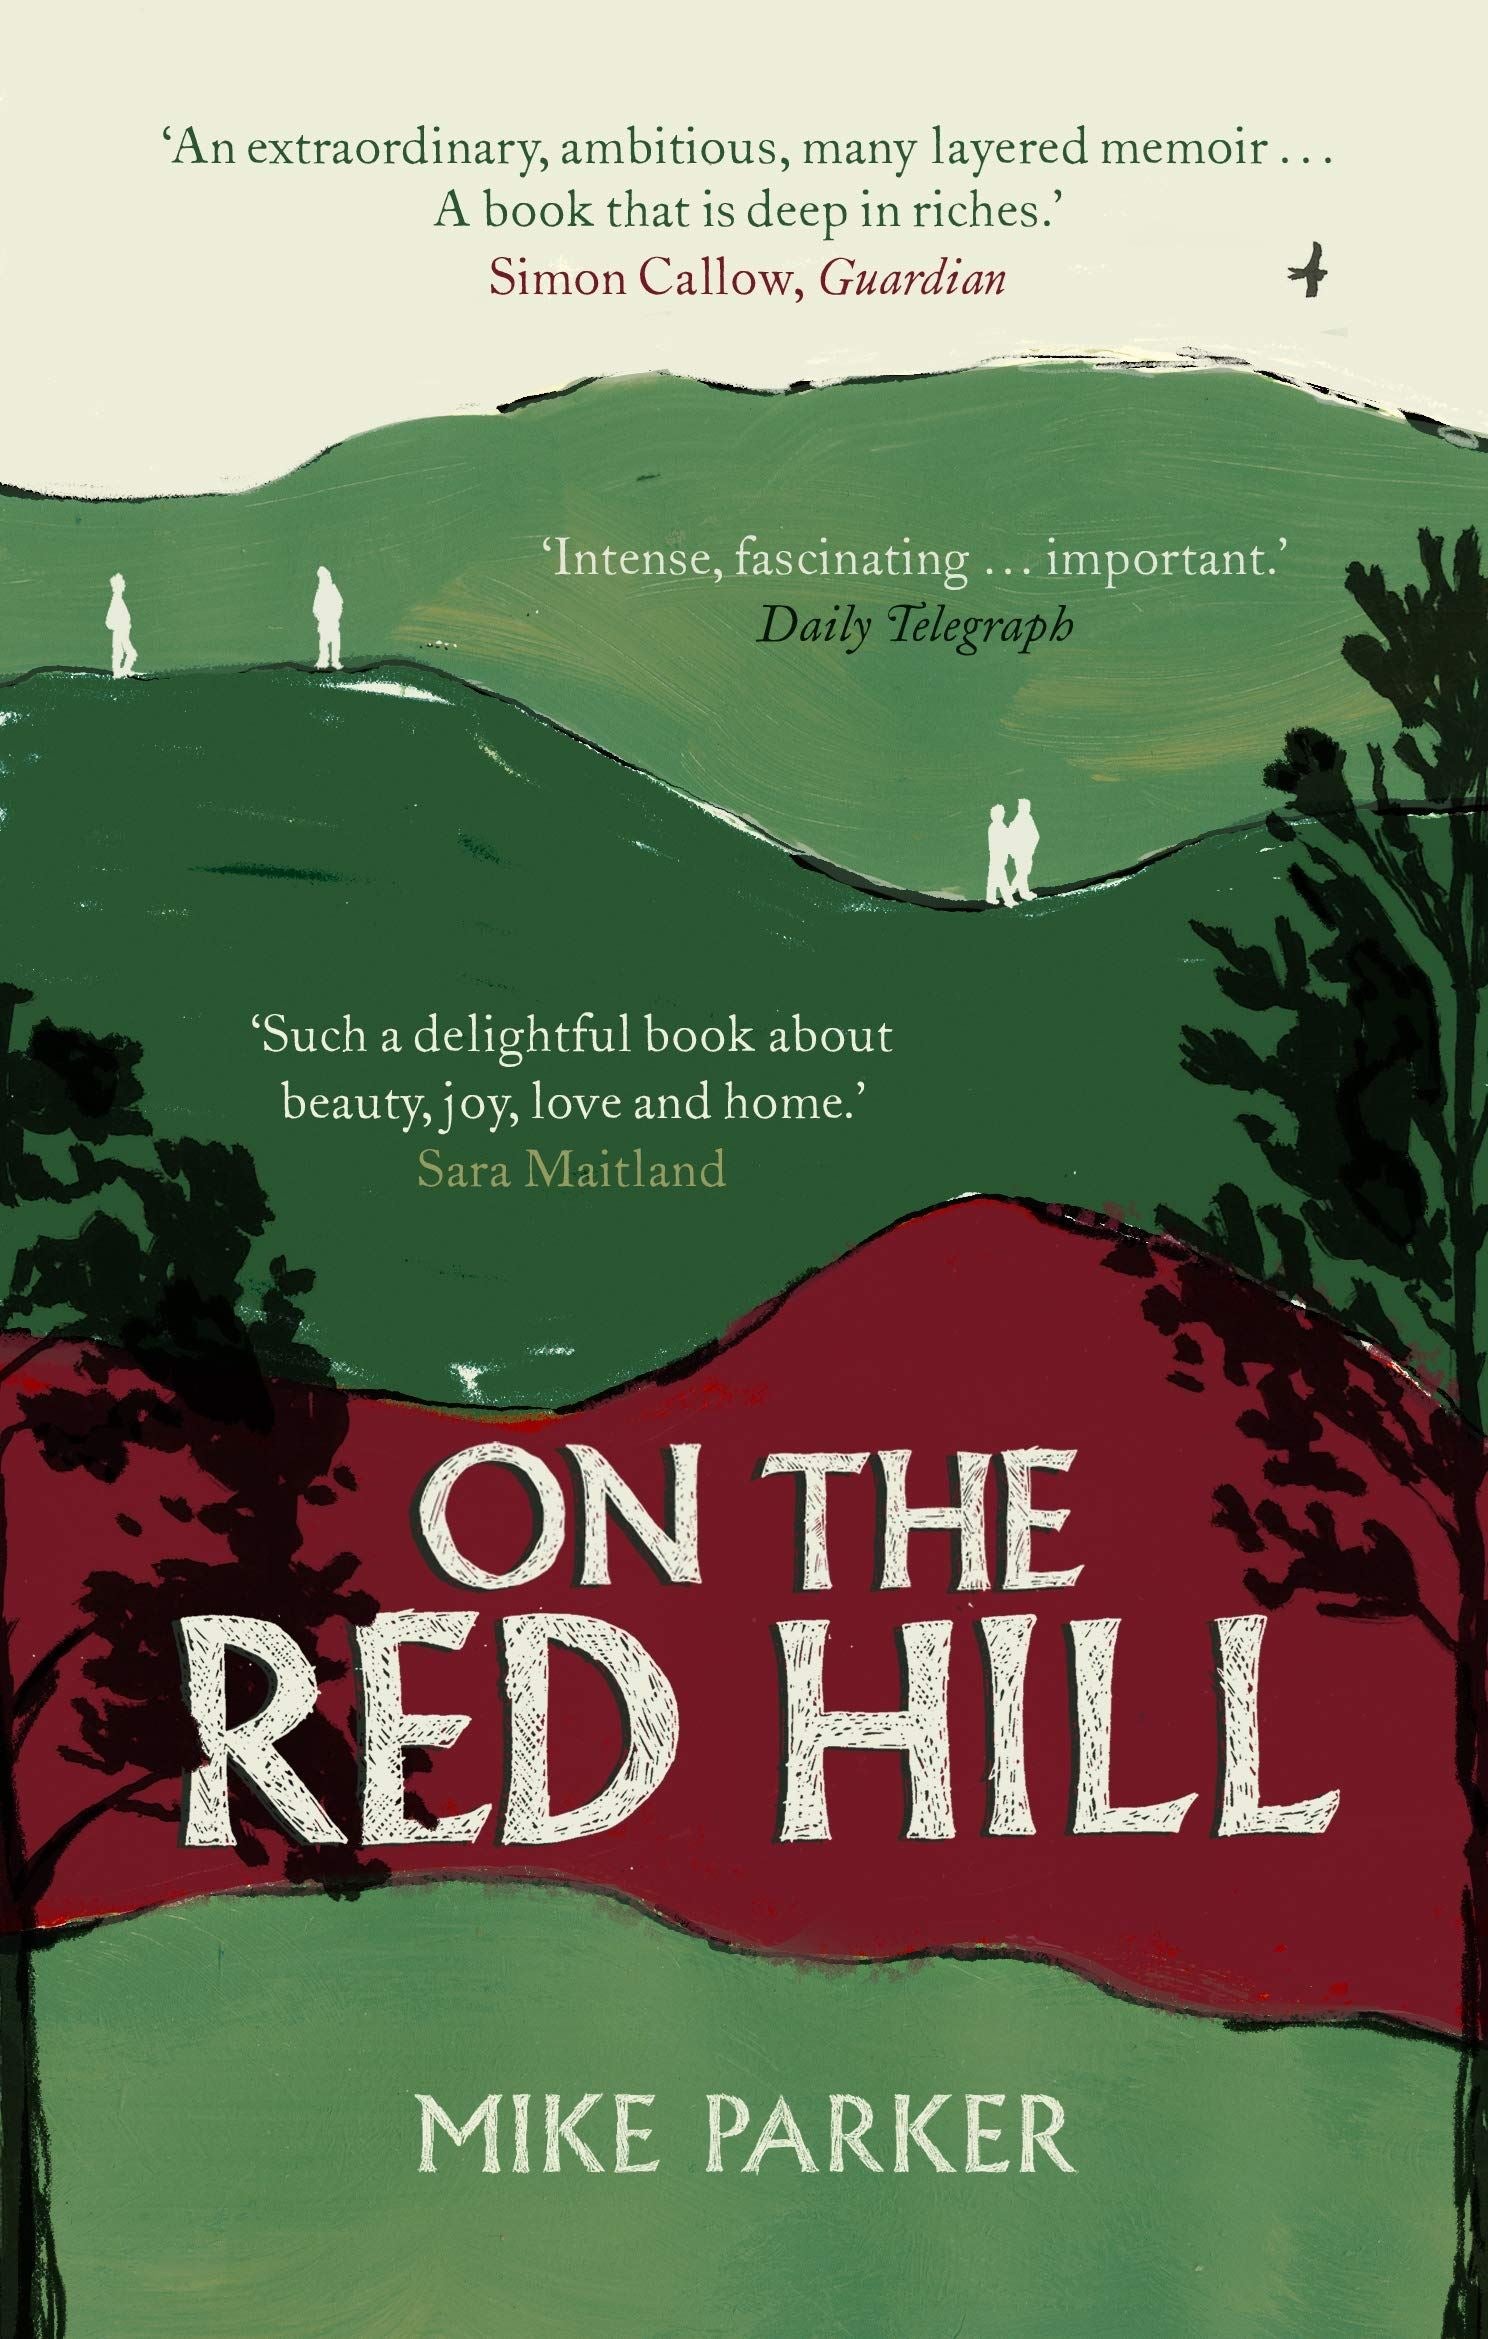 On The Red Hill